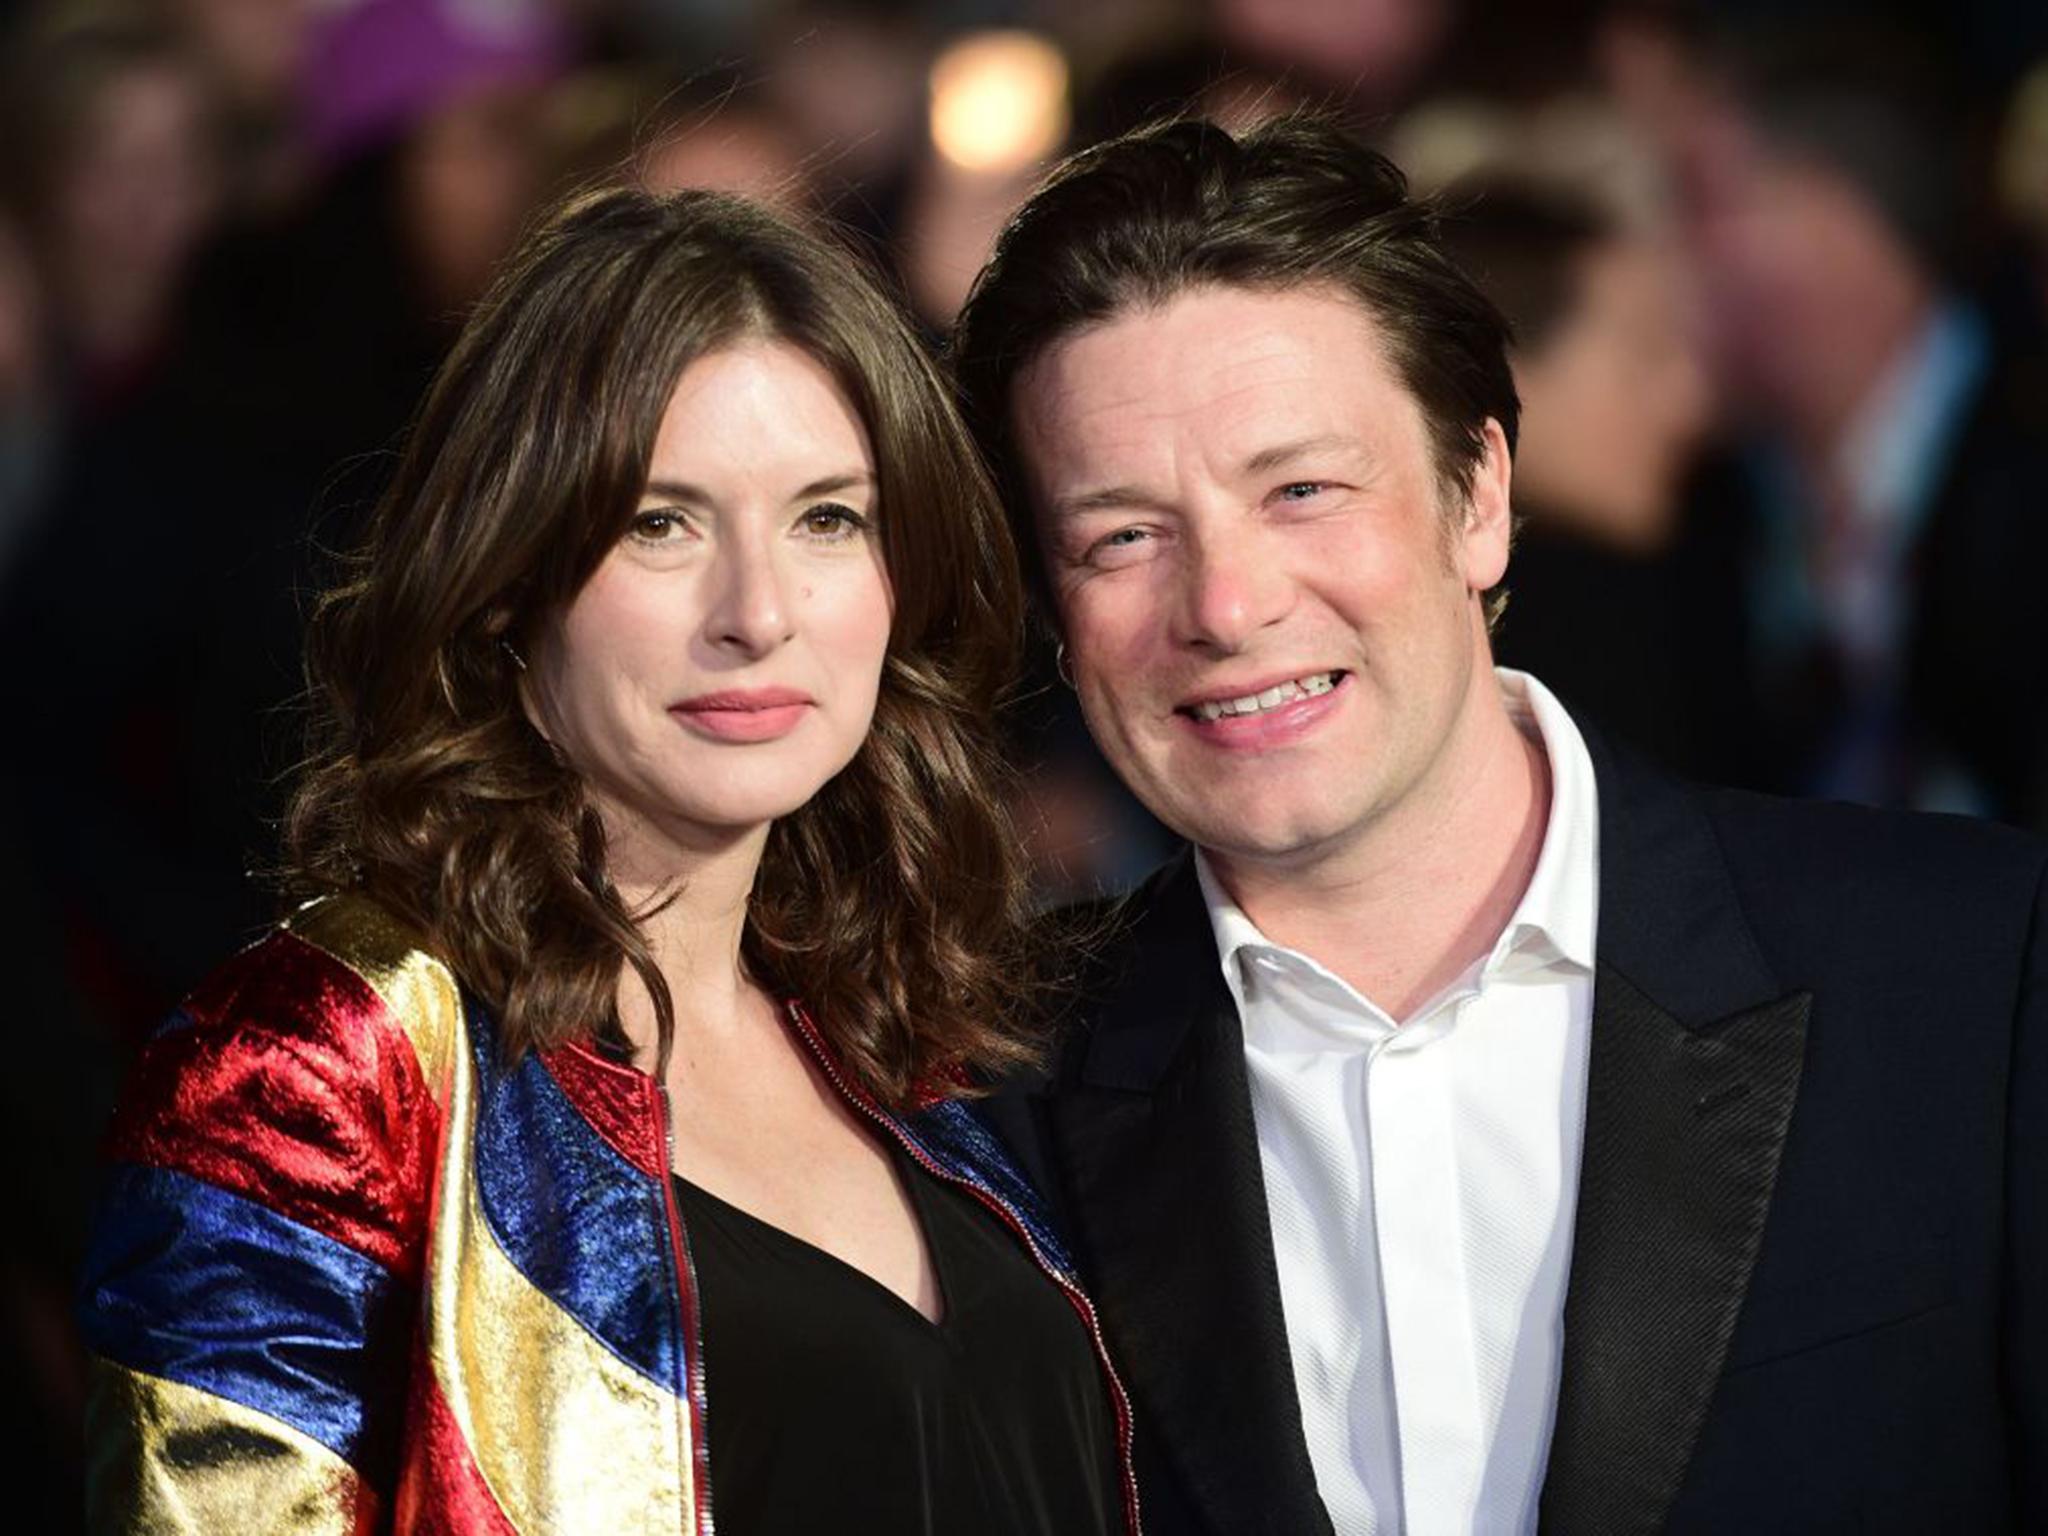 &#13;
As Juliette and Jamie Oliver prepare for a fifth child, he should know better than to lecture new mothers &#13;